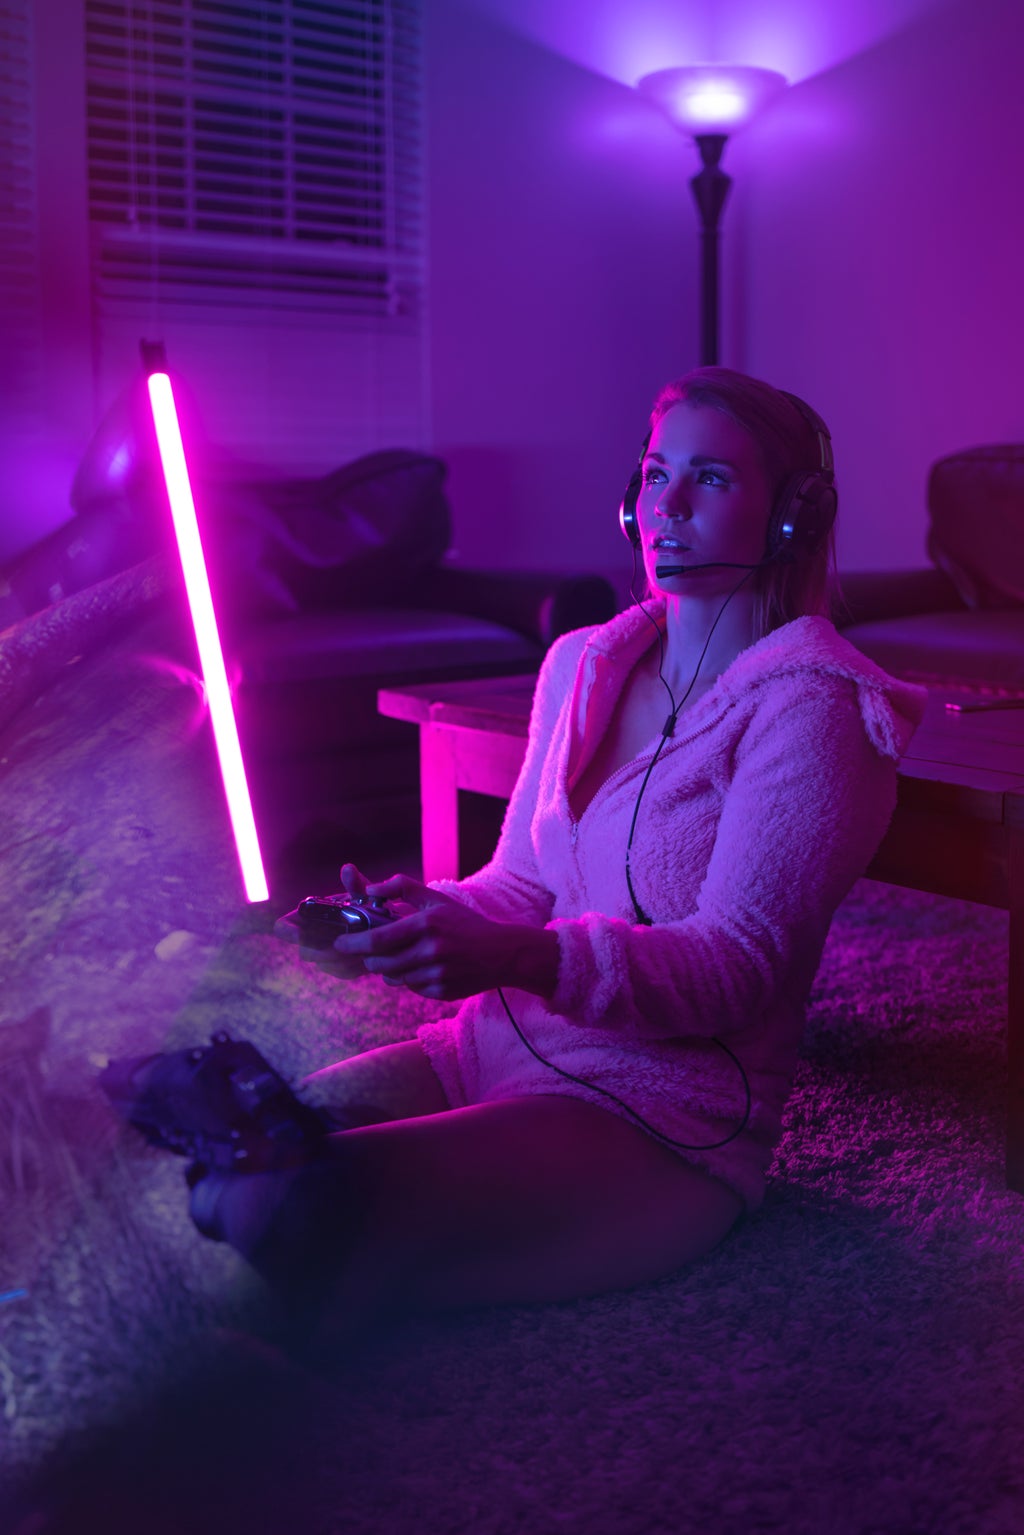 Woman playing a video game with purple lighting in the background